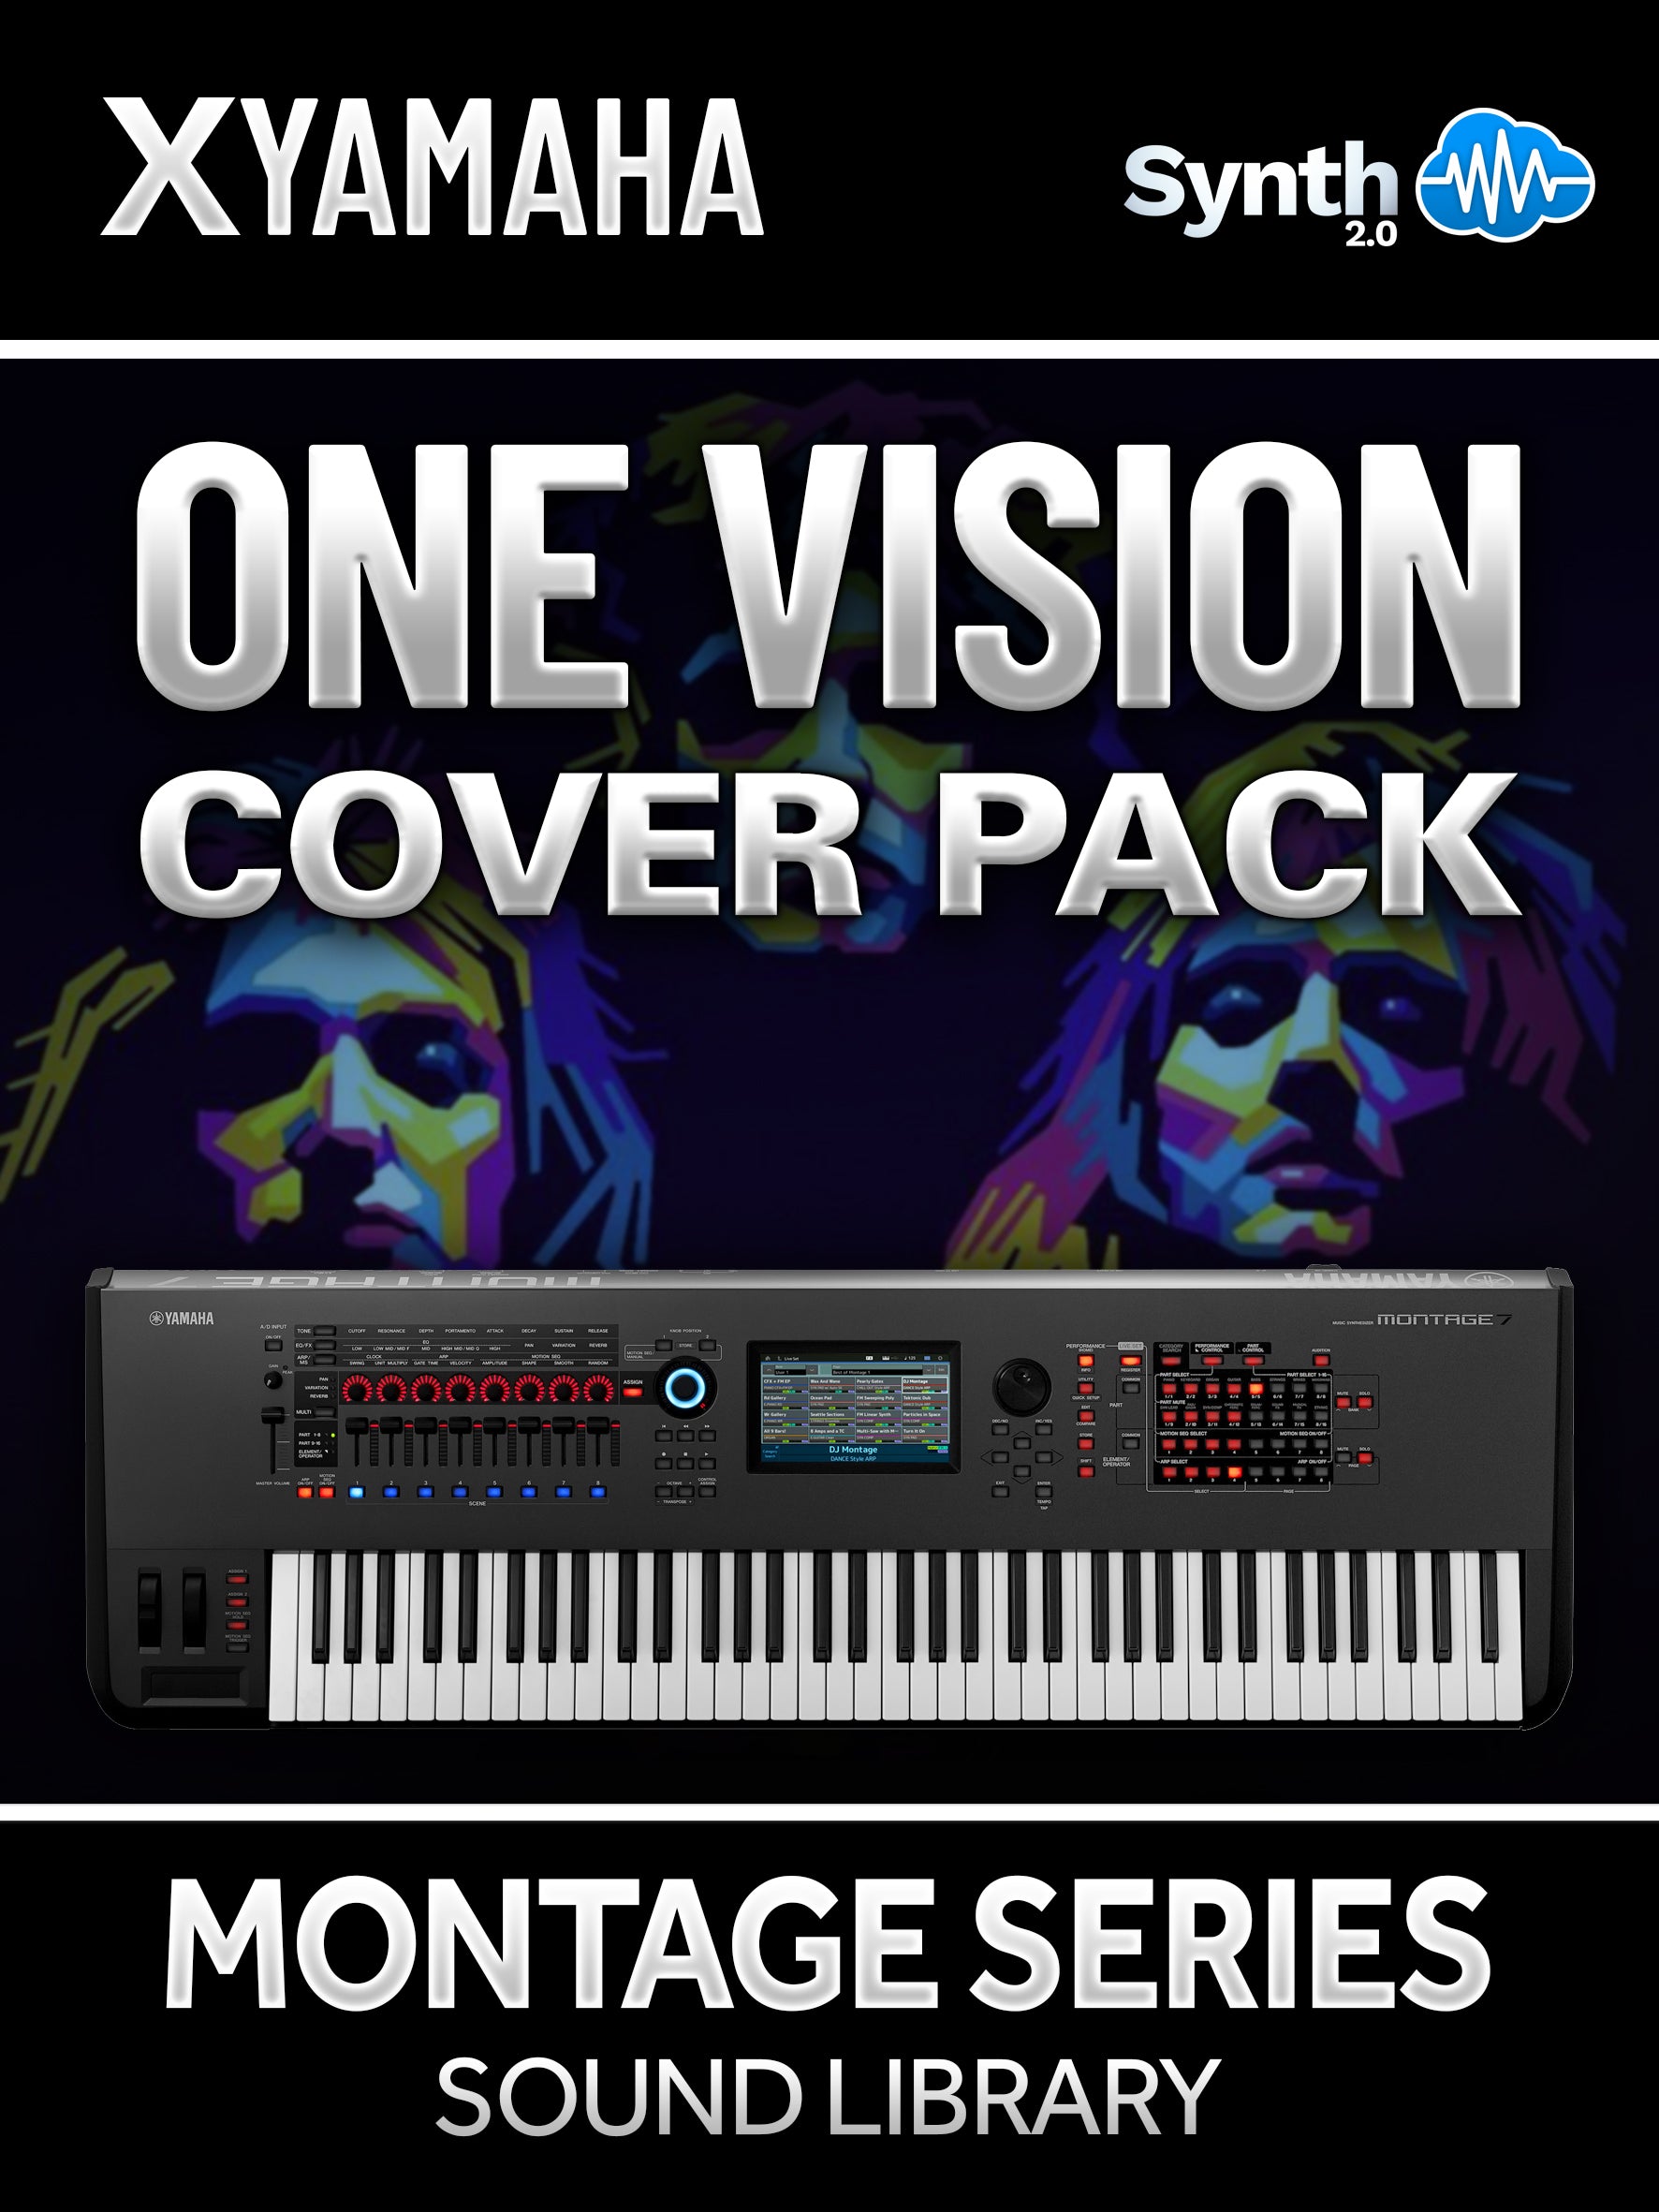 LDX200 - One Vision Cover Pack - Yamaha MONTAGE / M ( 10 presets )